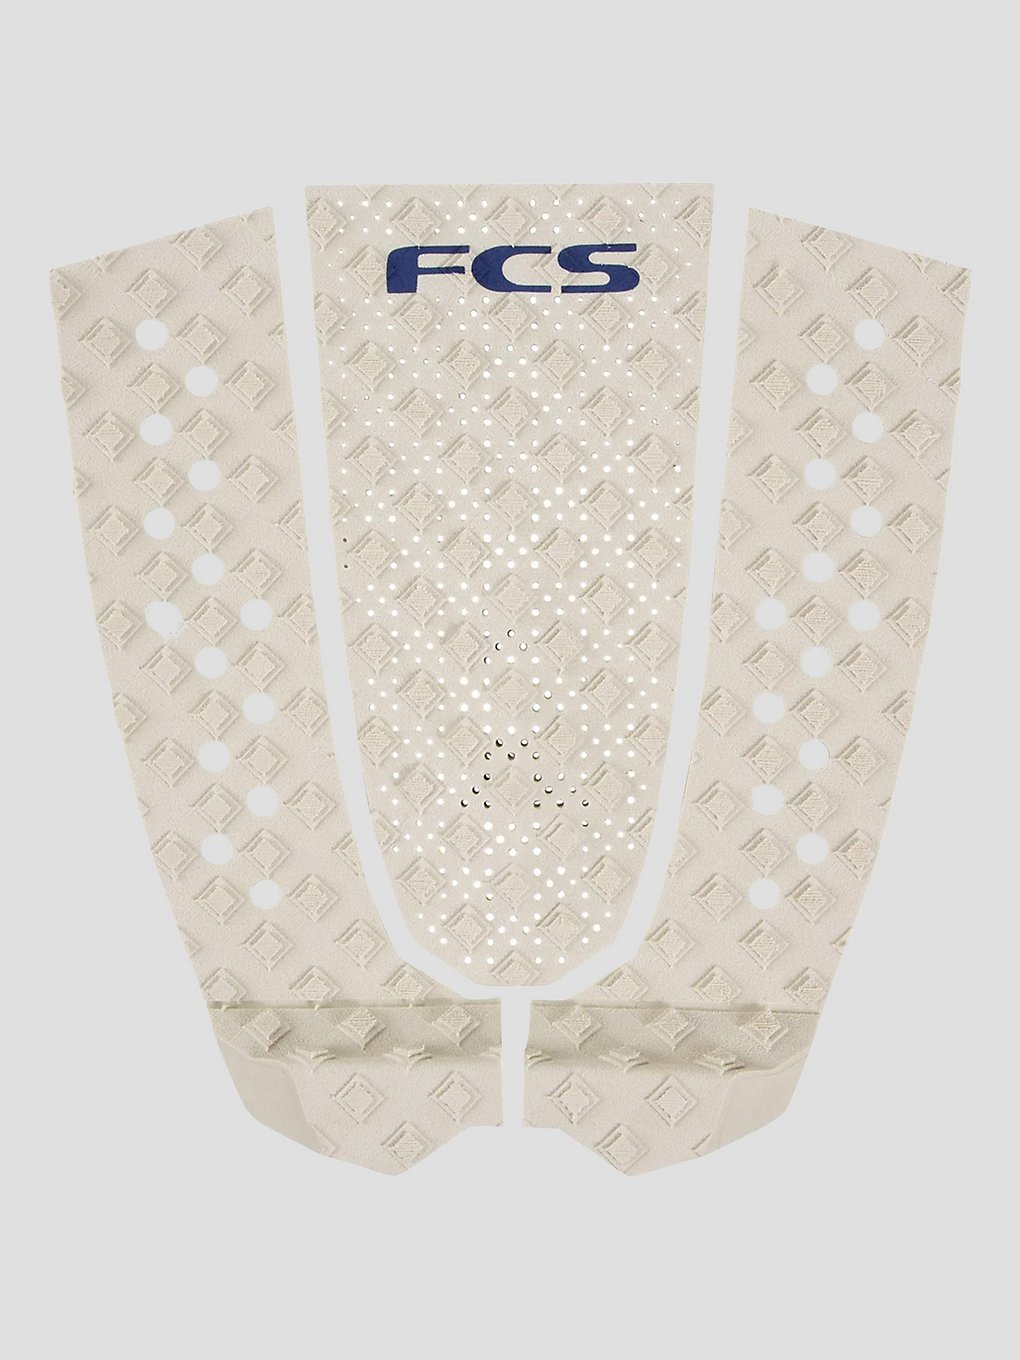 FCS T-3 Eco Traction Tail Pad grijs